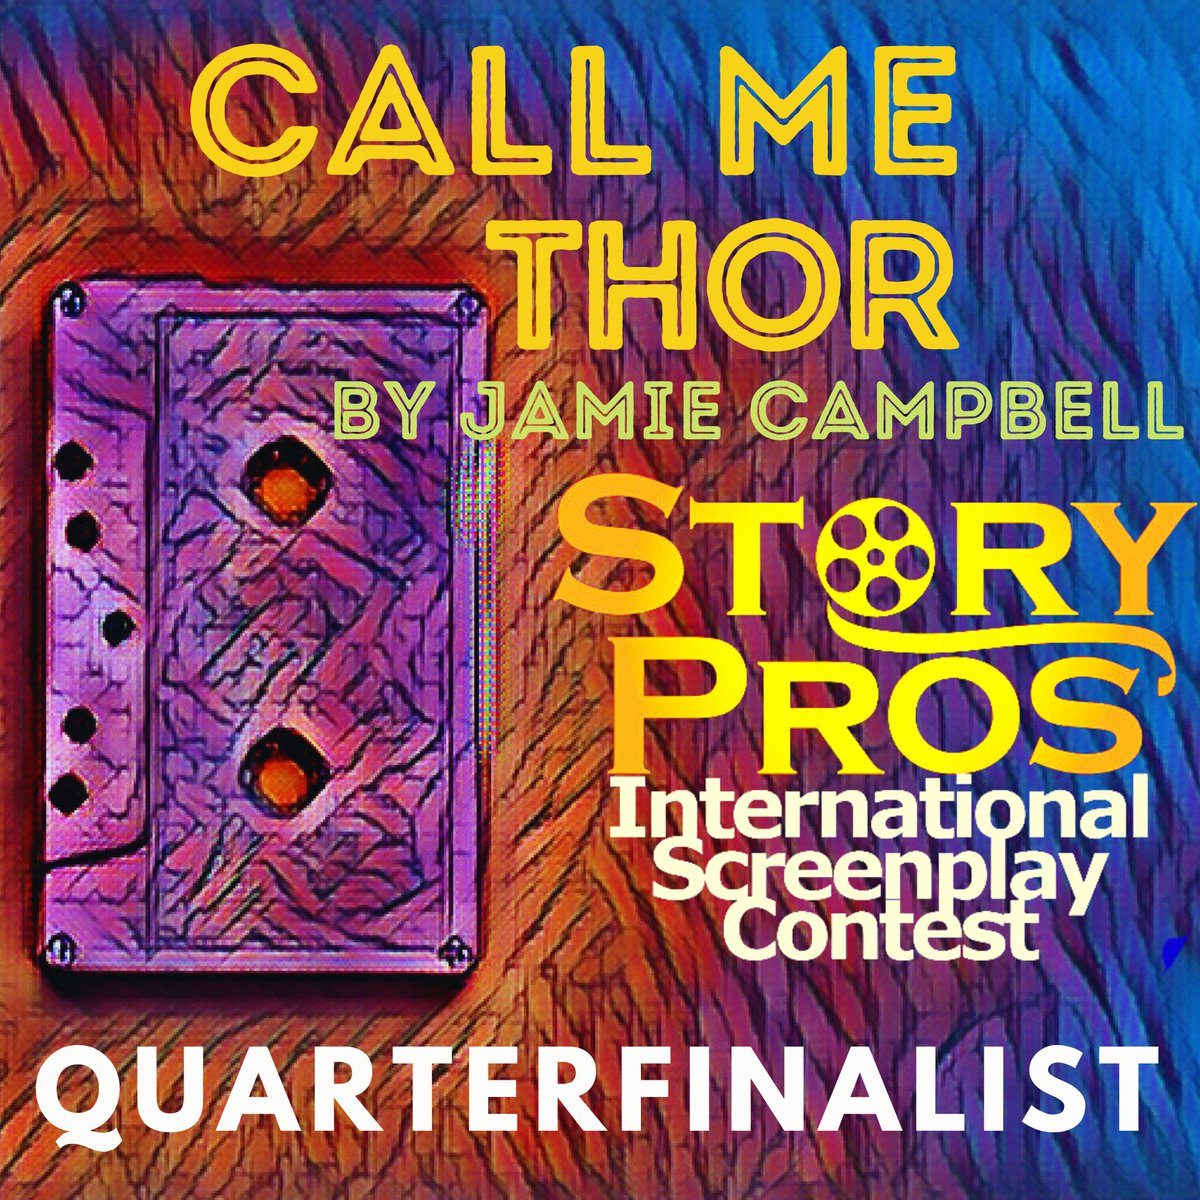 They just announced the Quarterfinalists for this year's StoryPros International Screenplay Contest, and I was happy to see my name and screenplay on the list (alongside Shia LaBeouf - what?!). Yet another reason to be thankful. https://t.co/KFzjXDNJ9c